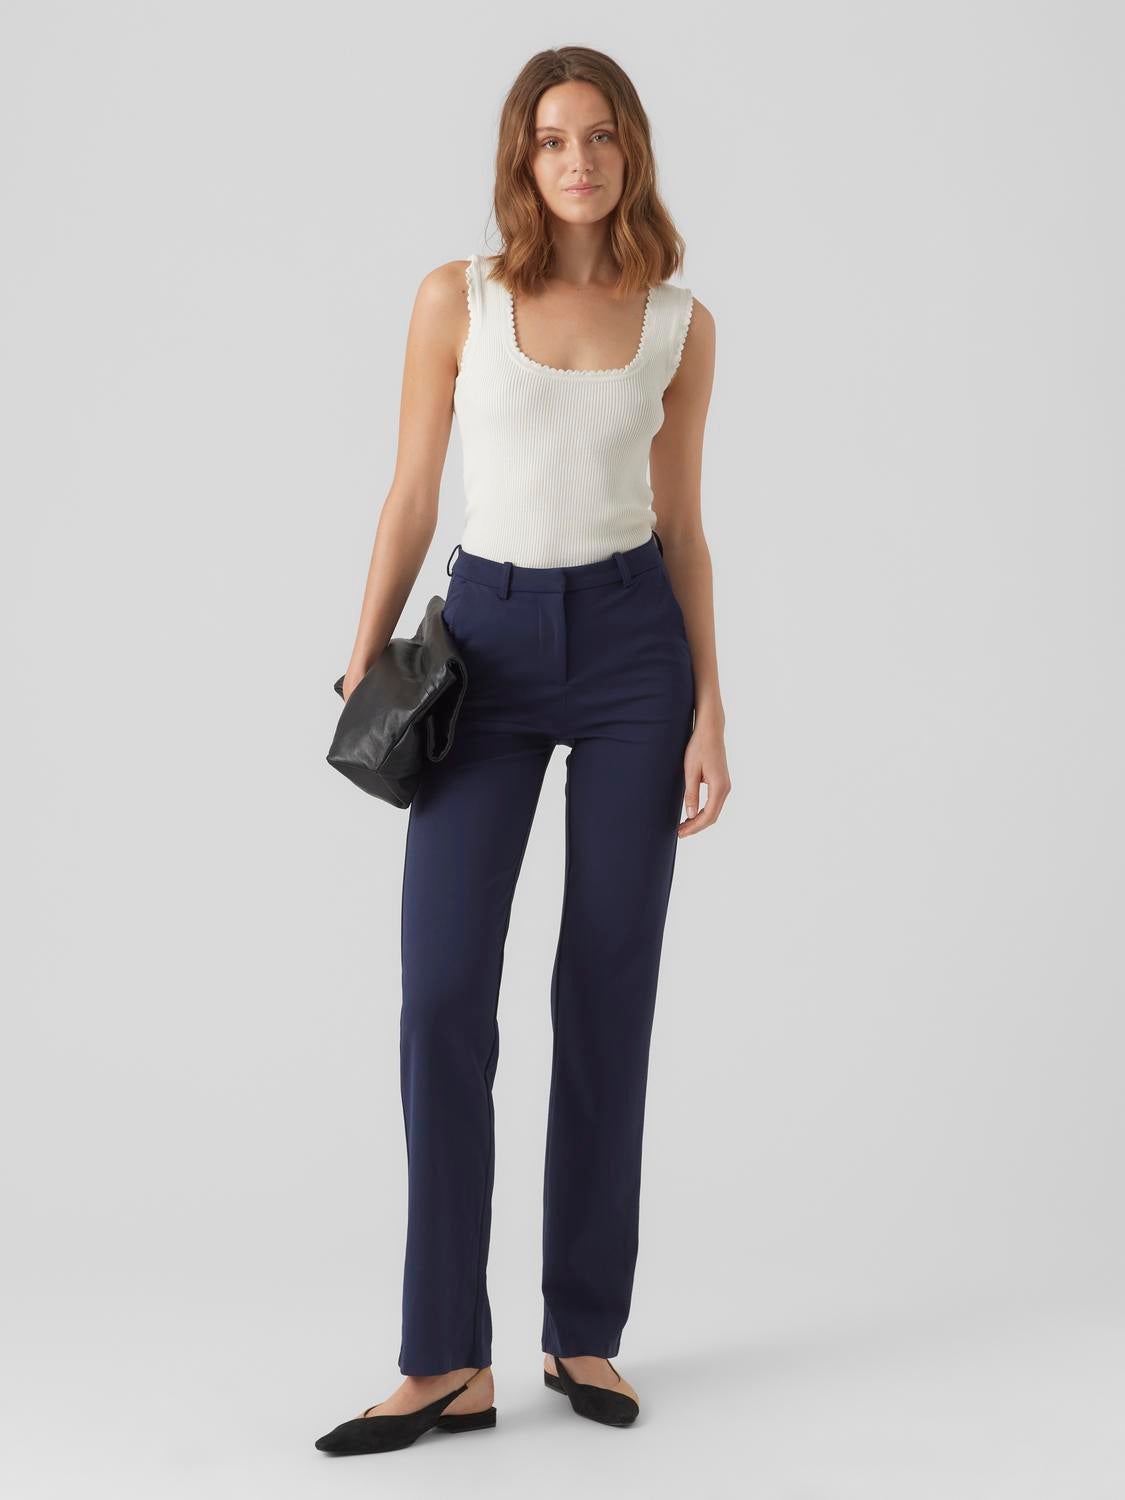 I'm 5'10 And These Are The High Street Trousers That Actually Fit